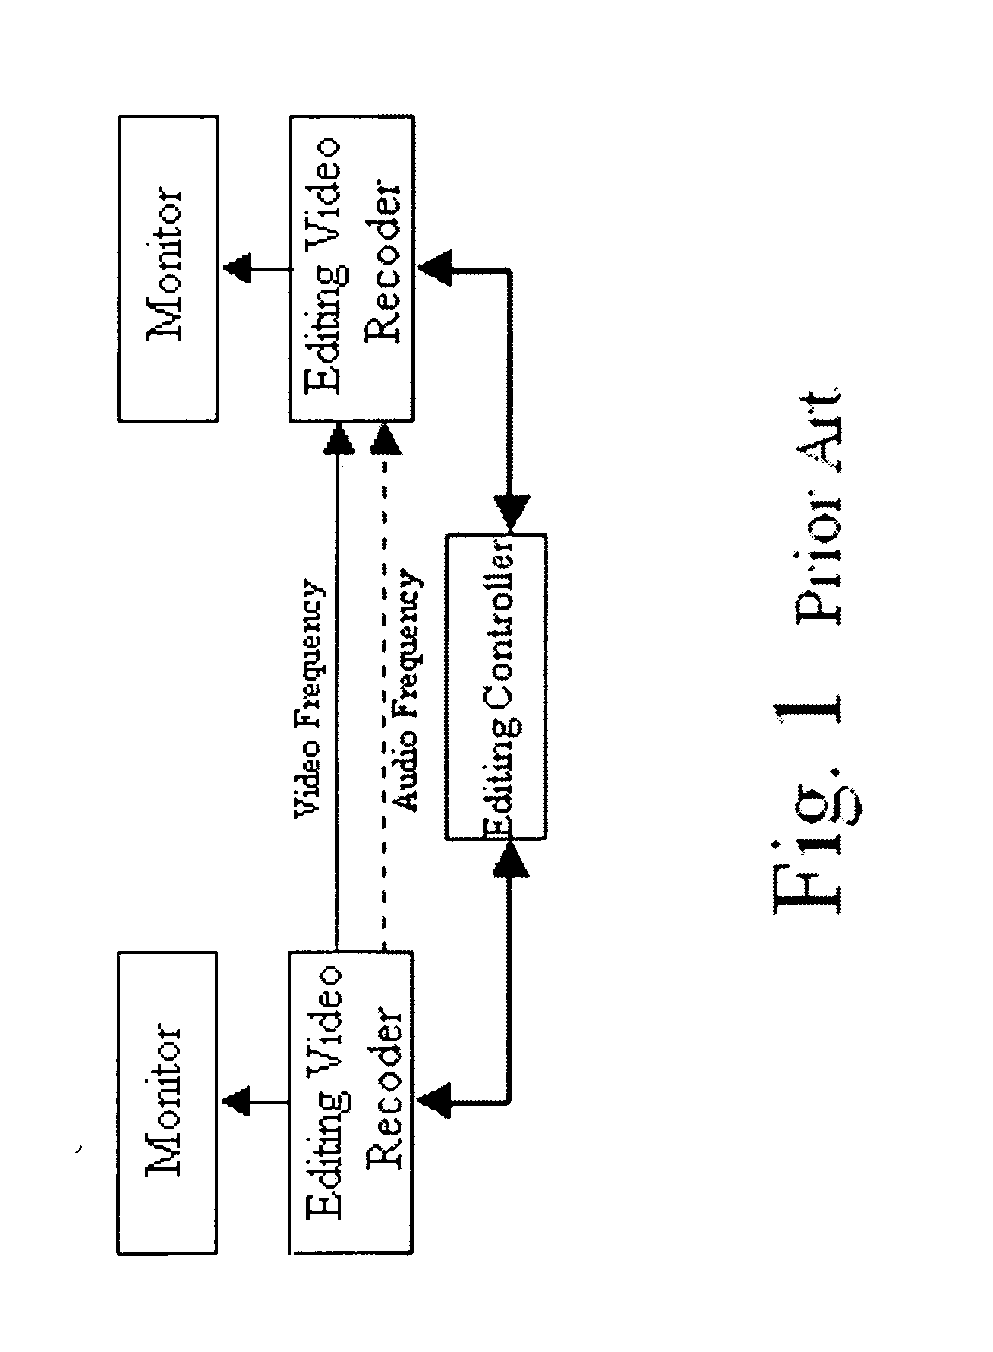 Non-linear editing system with portable digital recording media